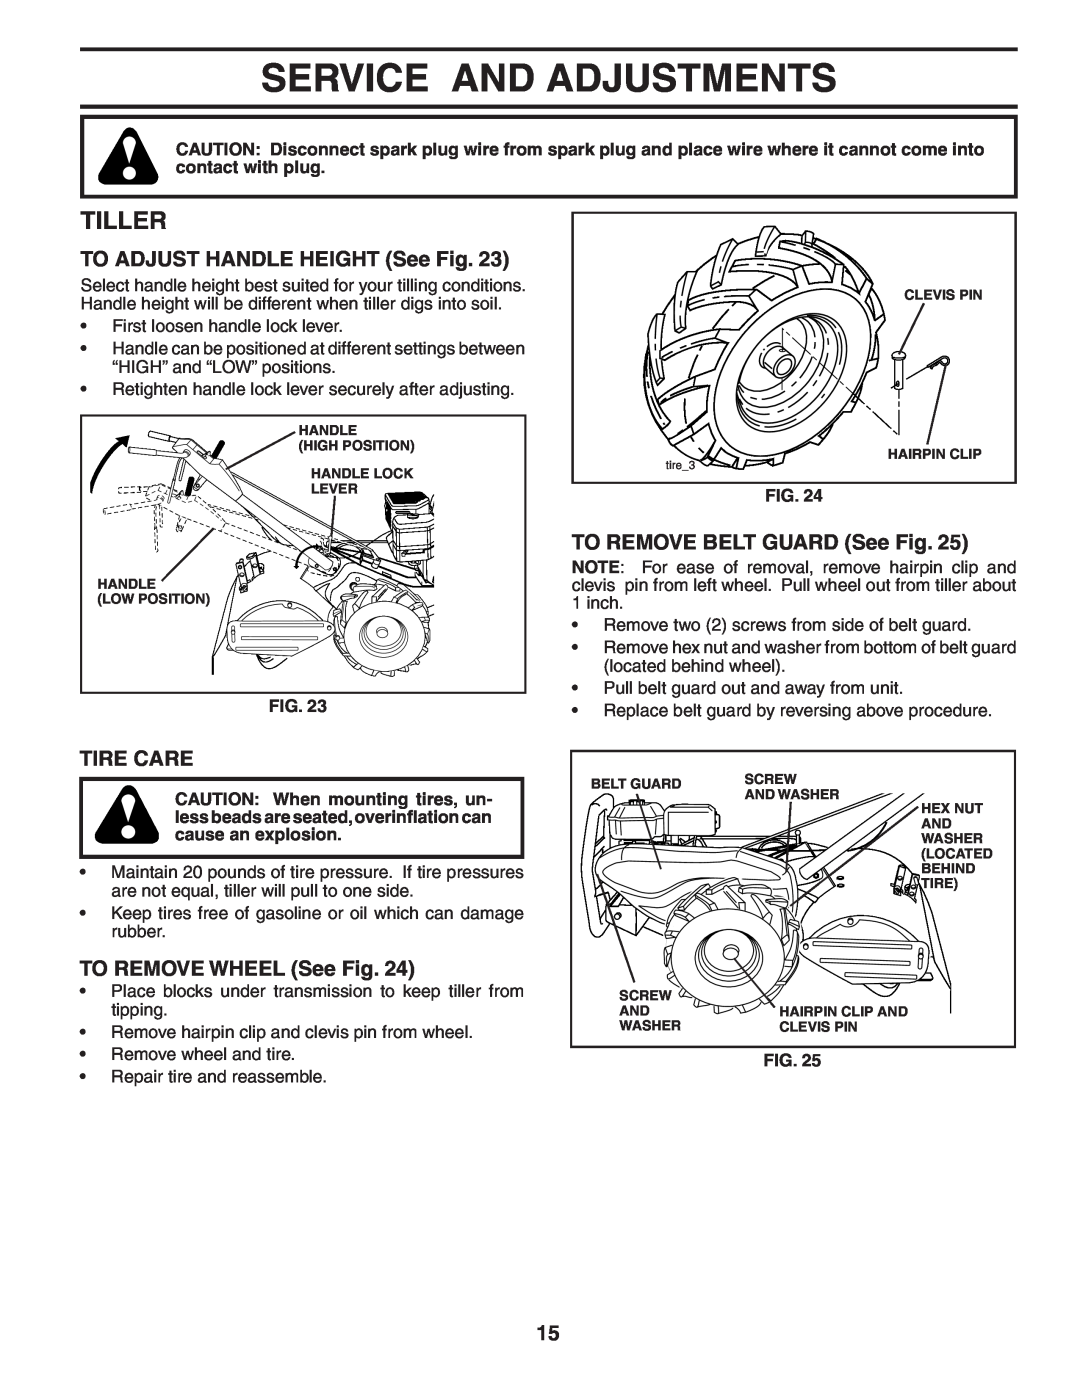 Poulan DRT65 Service And Adjustments, Tiller, TO ADJUST HANDLE HEIGHT See Fig, TO REMOVE BELT GUARD See Fig, Tire Care 